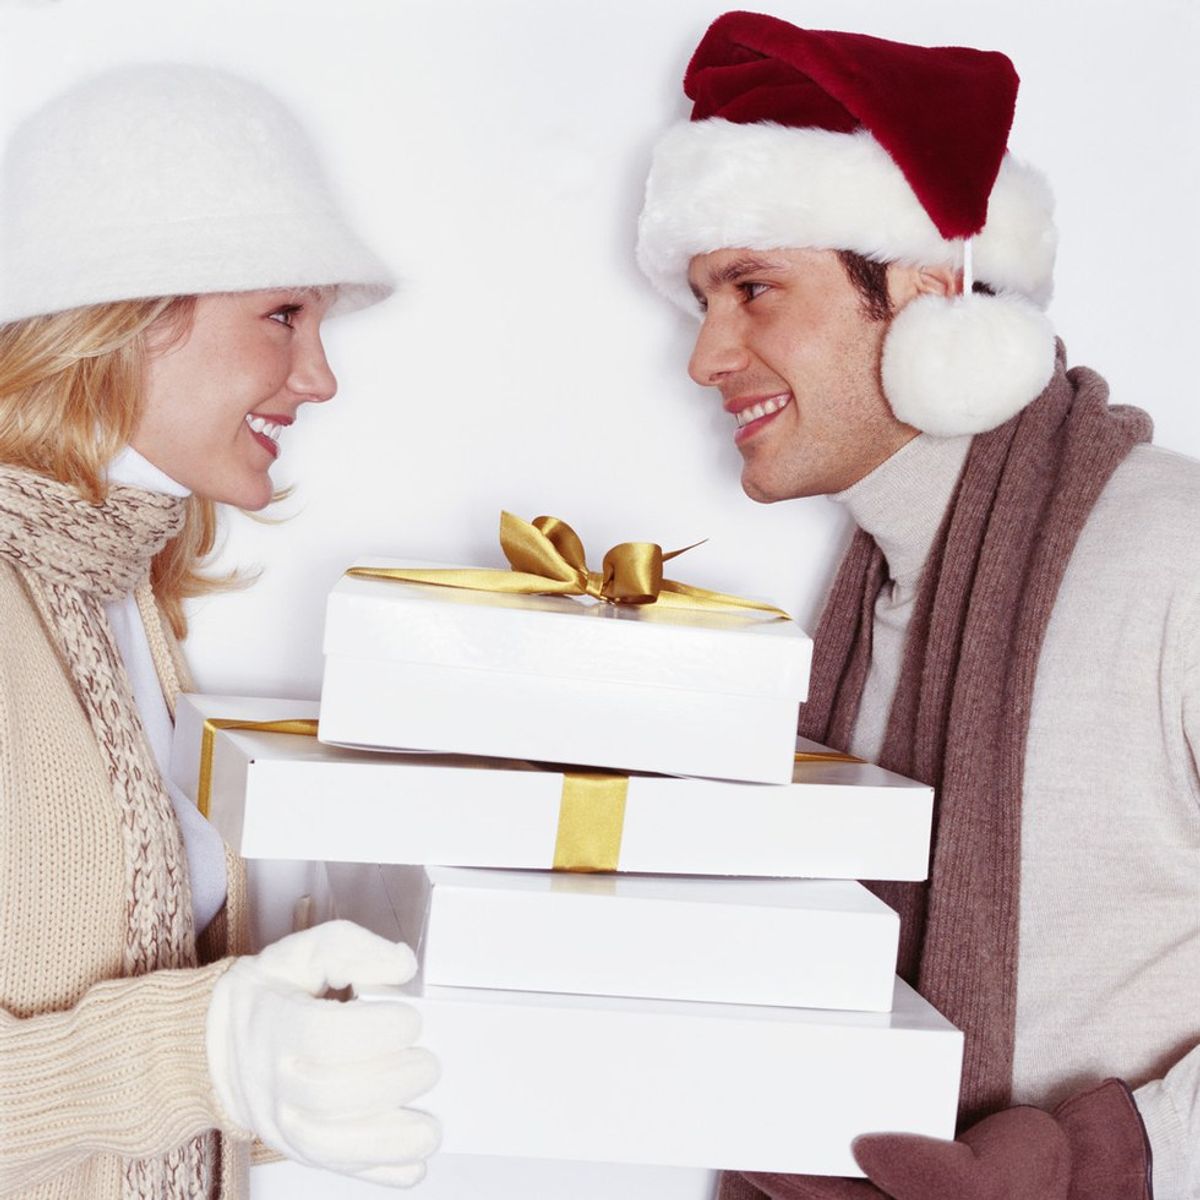 12 Christmas Gifts For Your Special Someone